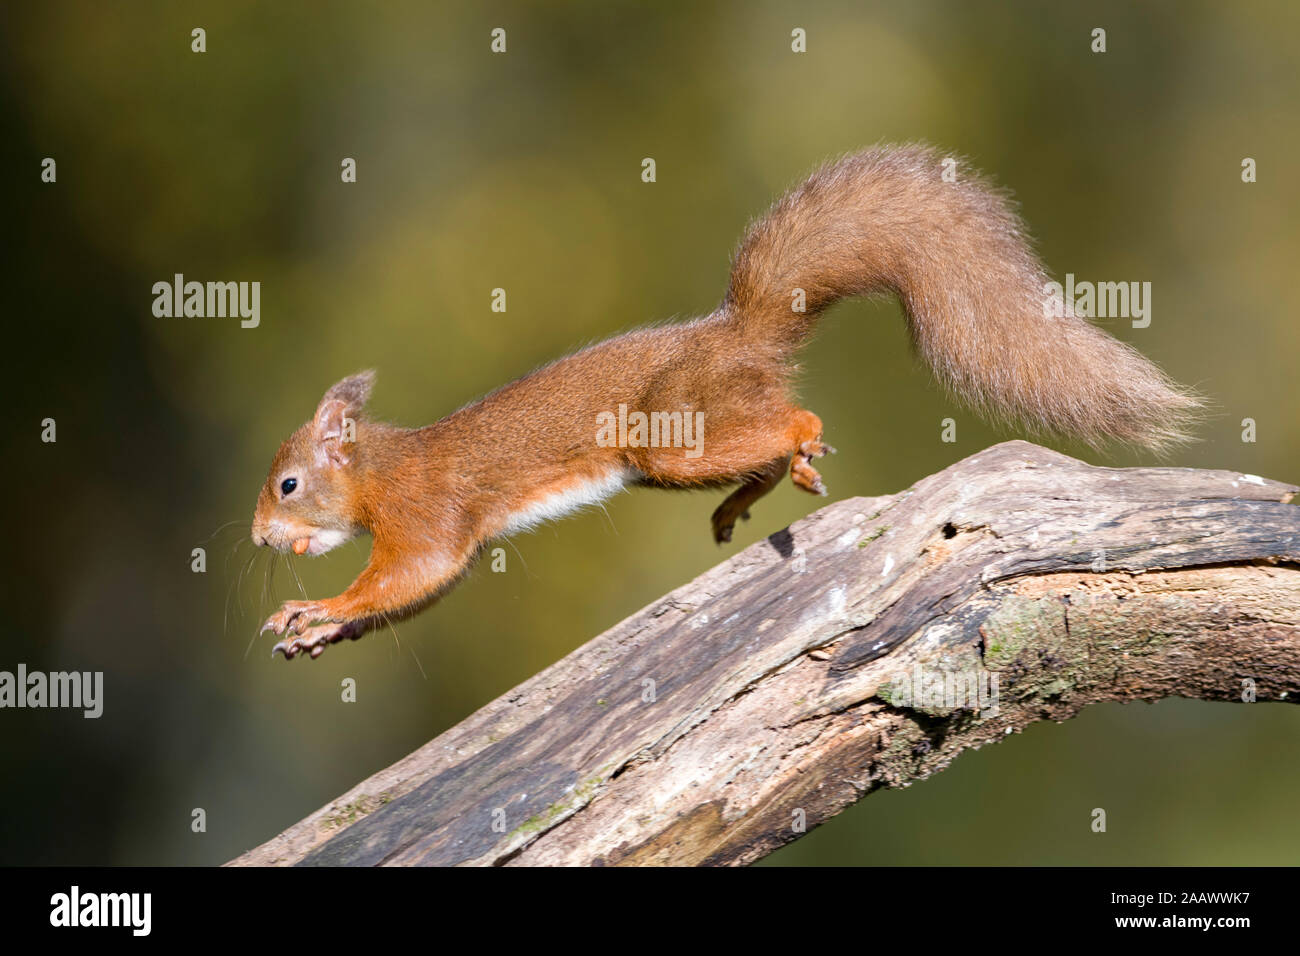 Jumping red squirrel carrrying nut in mouth Stock Photo